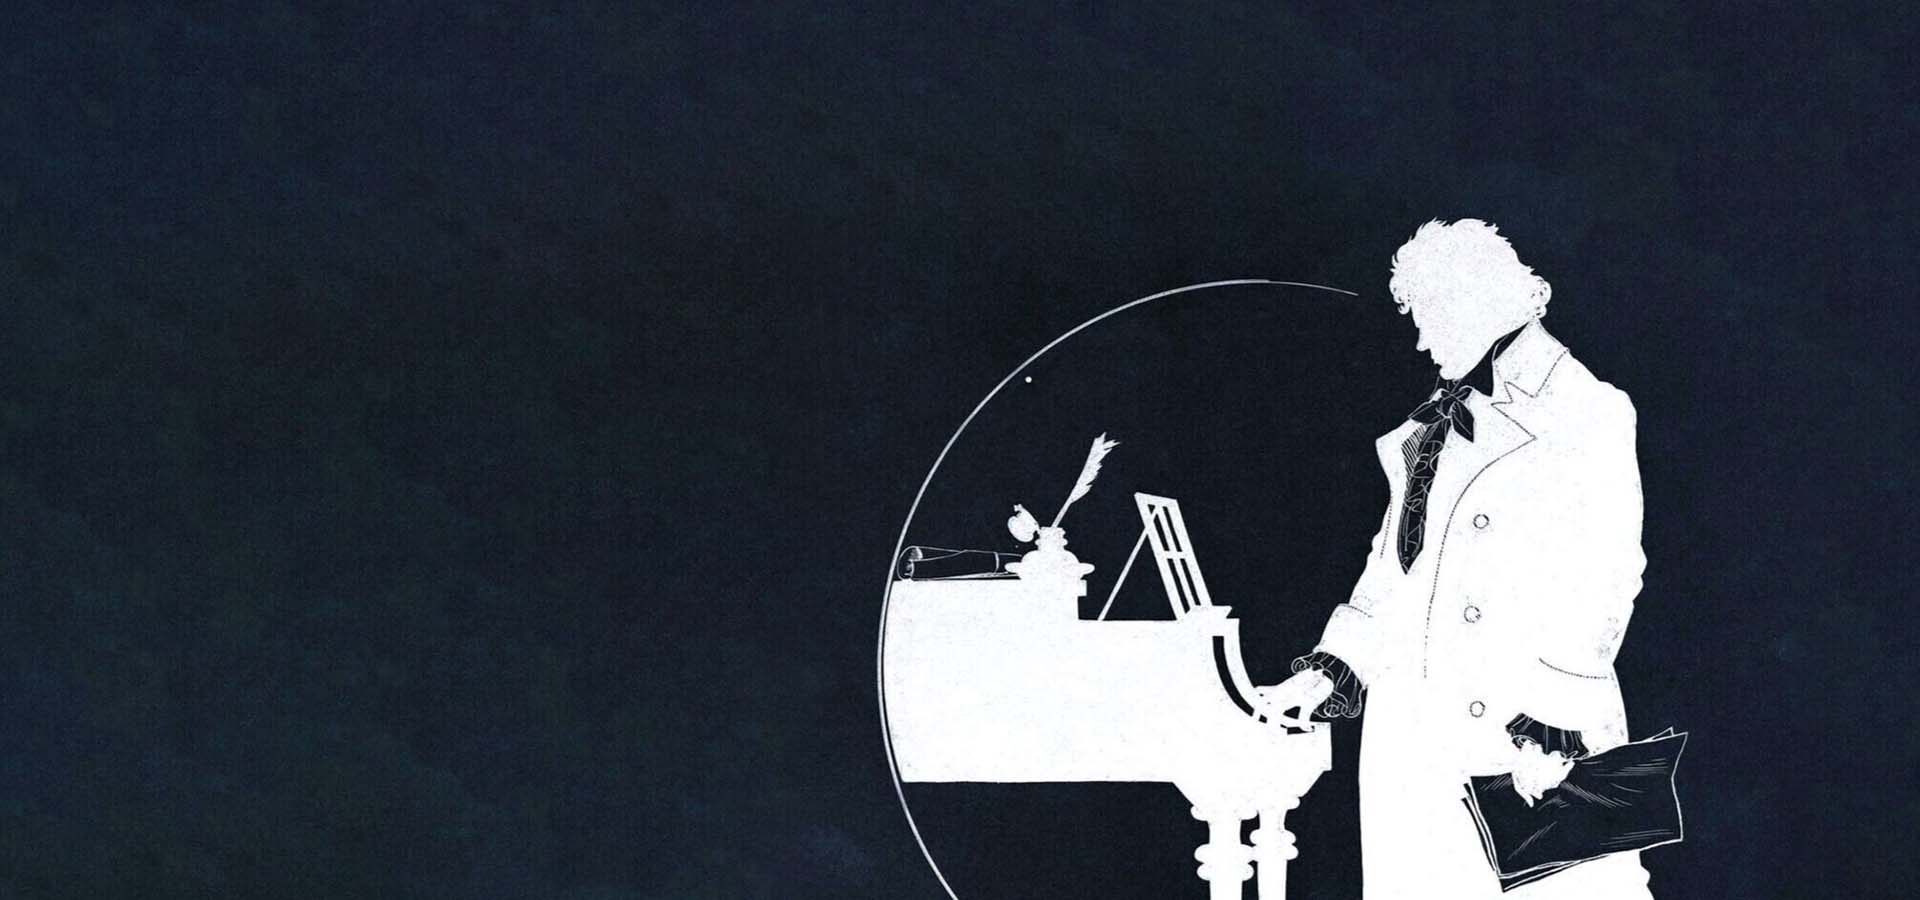 Black & white graphic of Beethoven standing at a piano